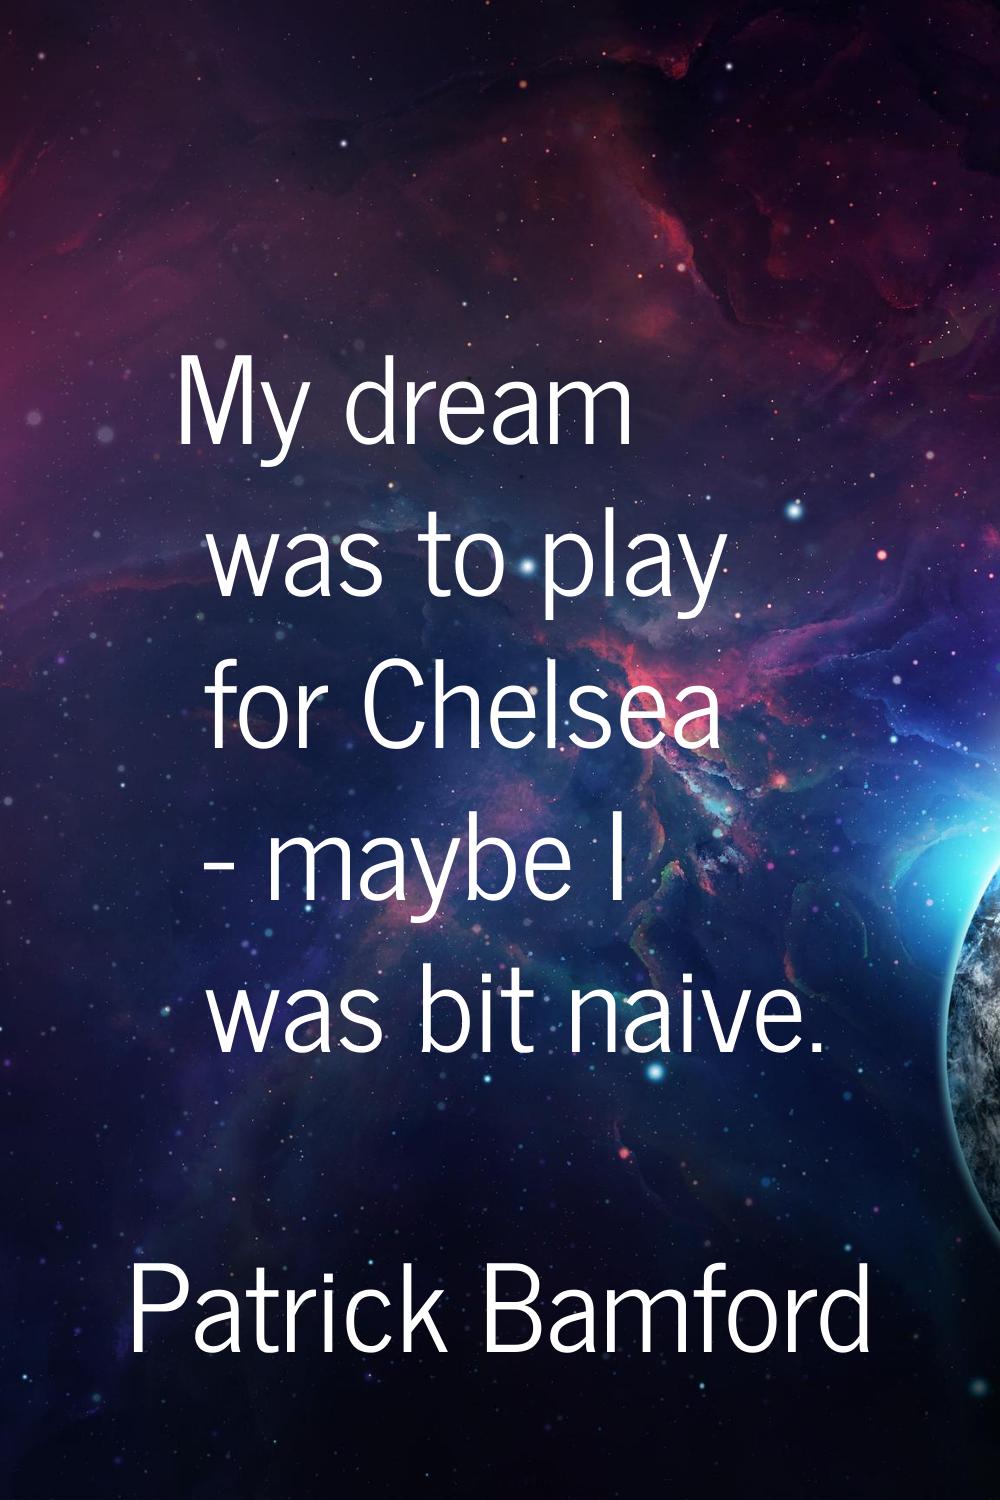 My dream was to play for Chelsea - maybe I was bit naive.